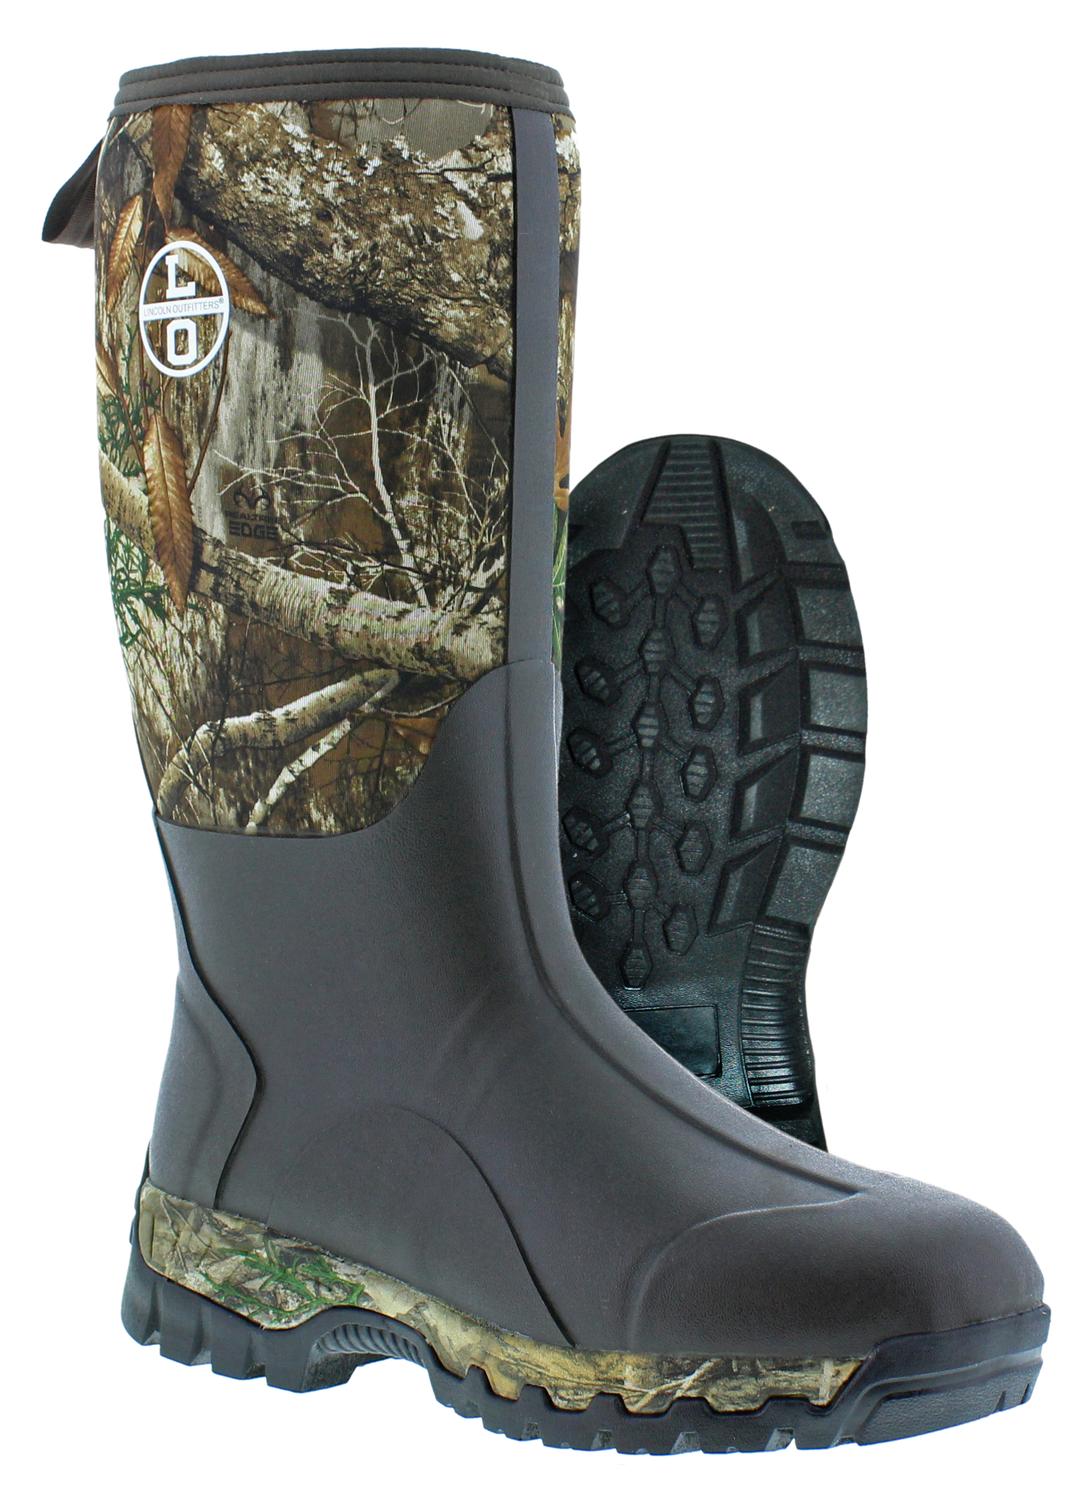 Lincoln Outfitters Men's Bayou II Boot Realtree Camo - 6841665